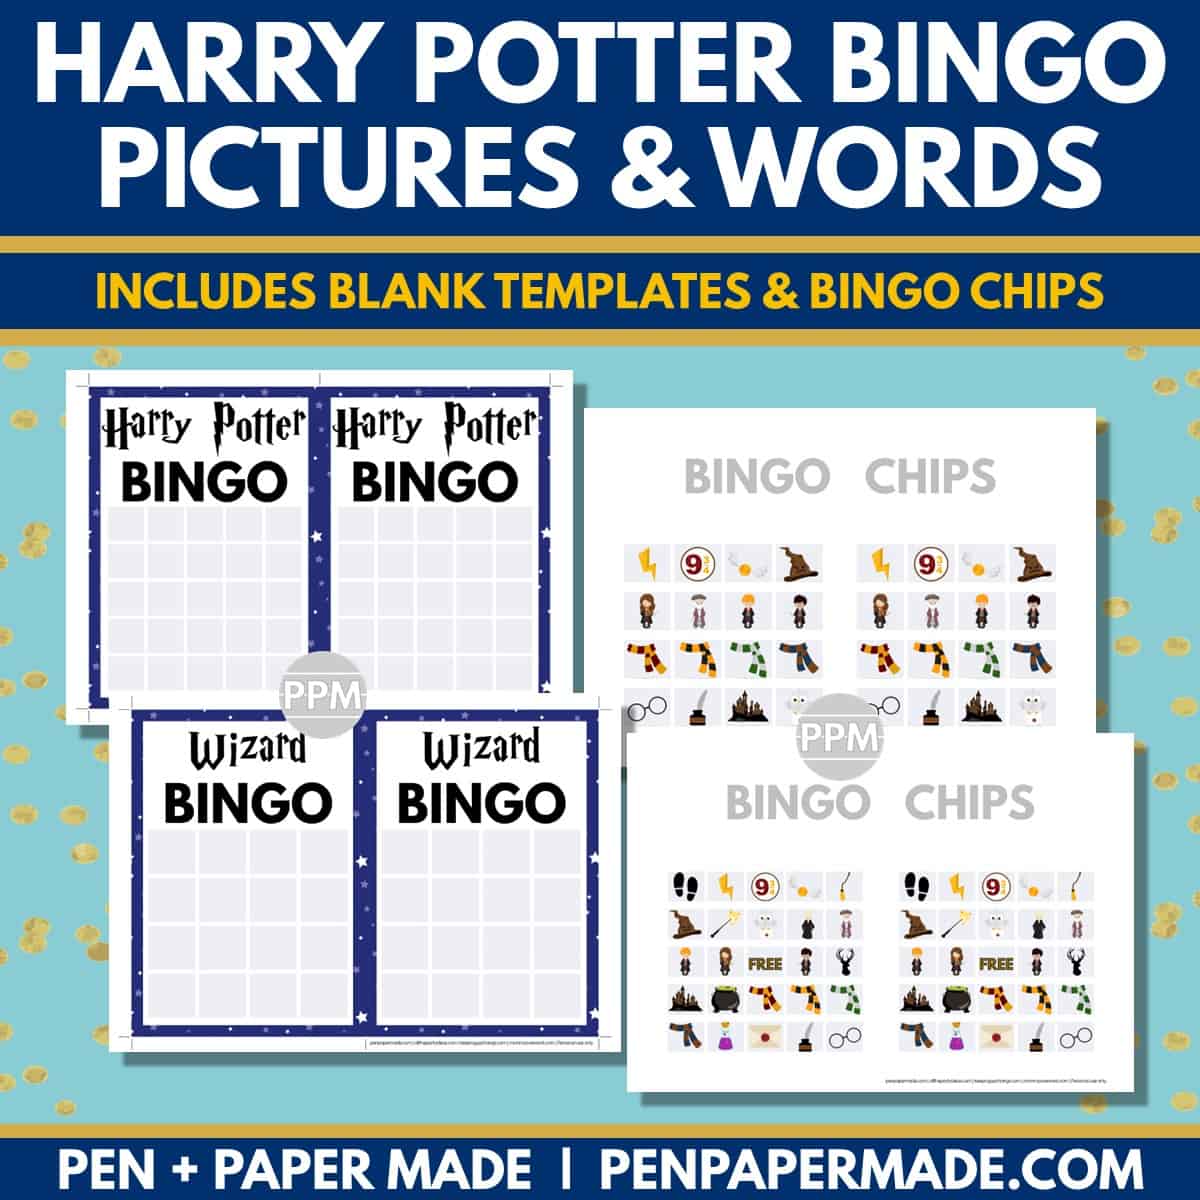 wizard and harry potter bingo card 5x5, 4x4, 3x3 game chips, tokens, markers.